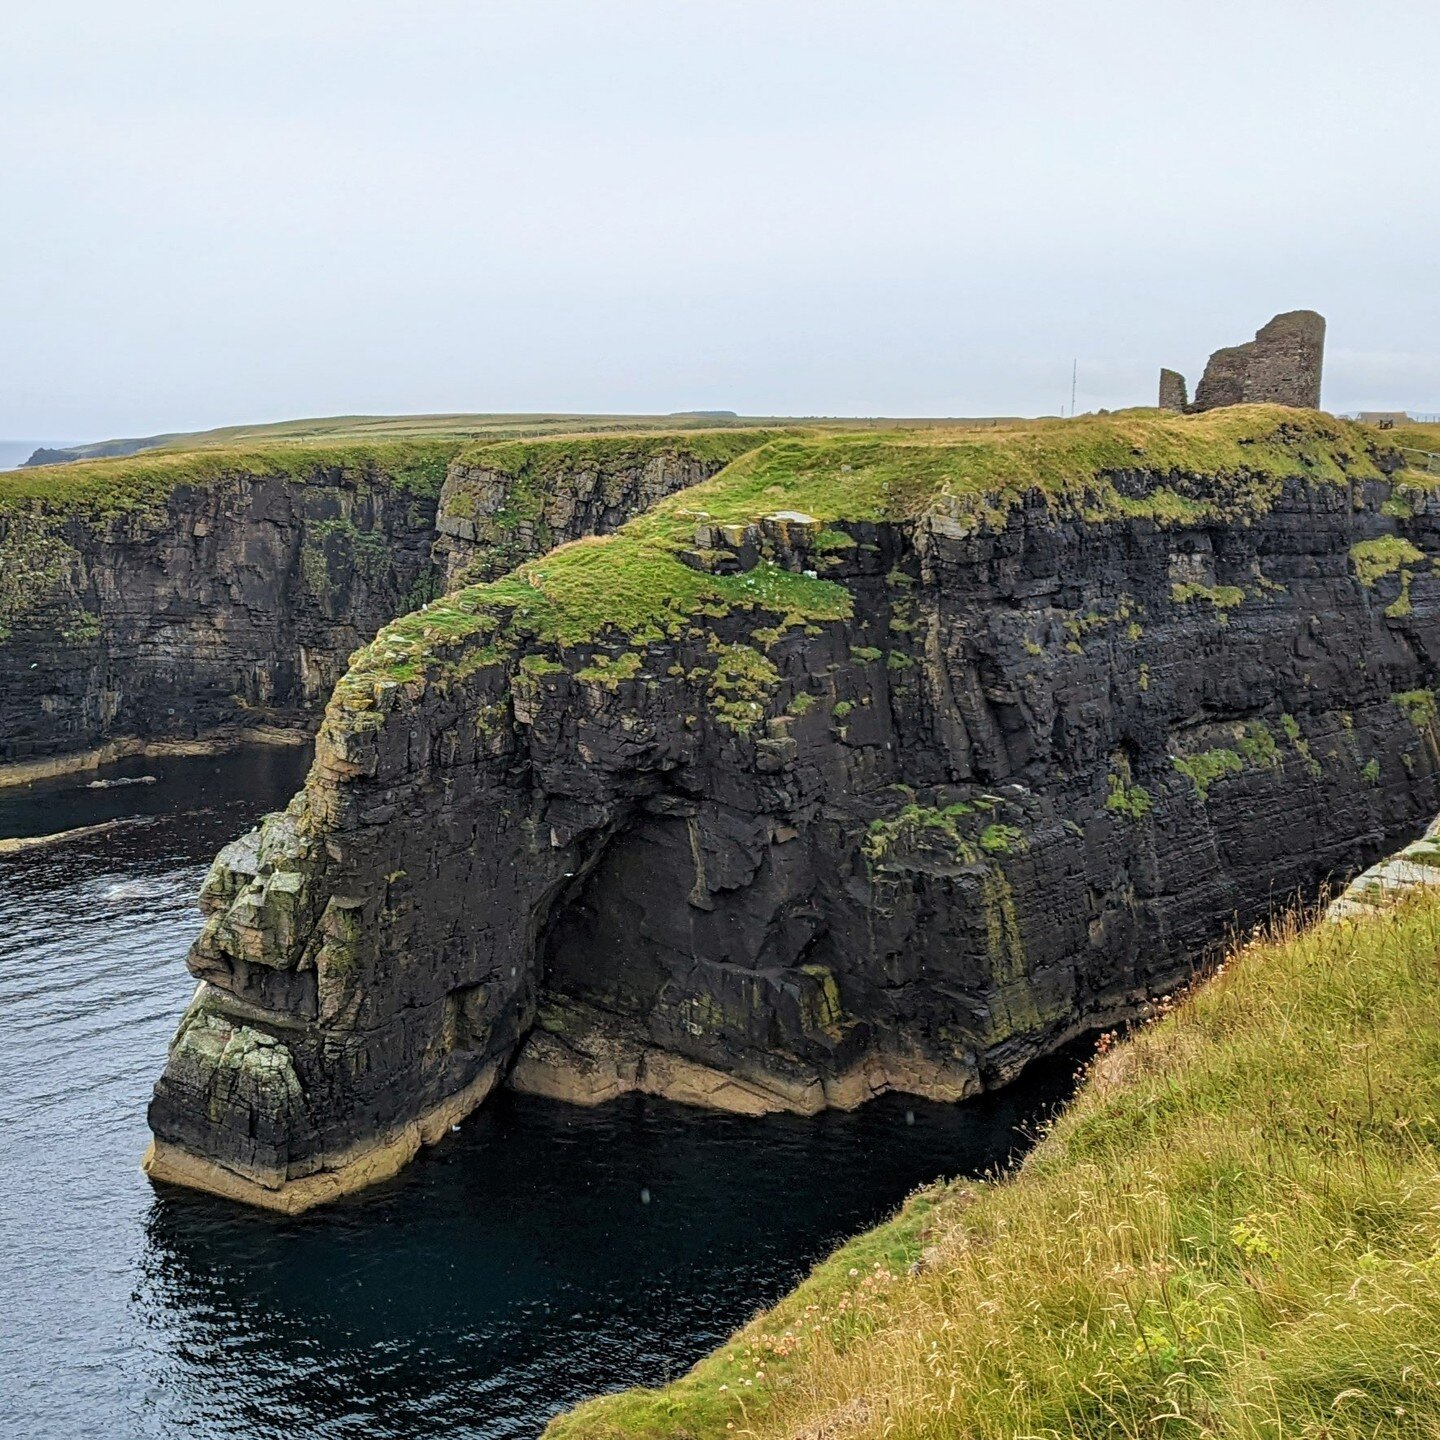 Wick Castle and the Old Man Of Wick

#caithness #scottishhighlands #nc500 #nc500accommodationsightsandtips #northcoast500 #scotland